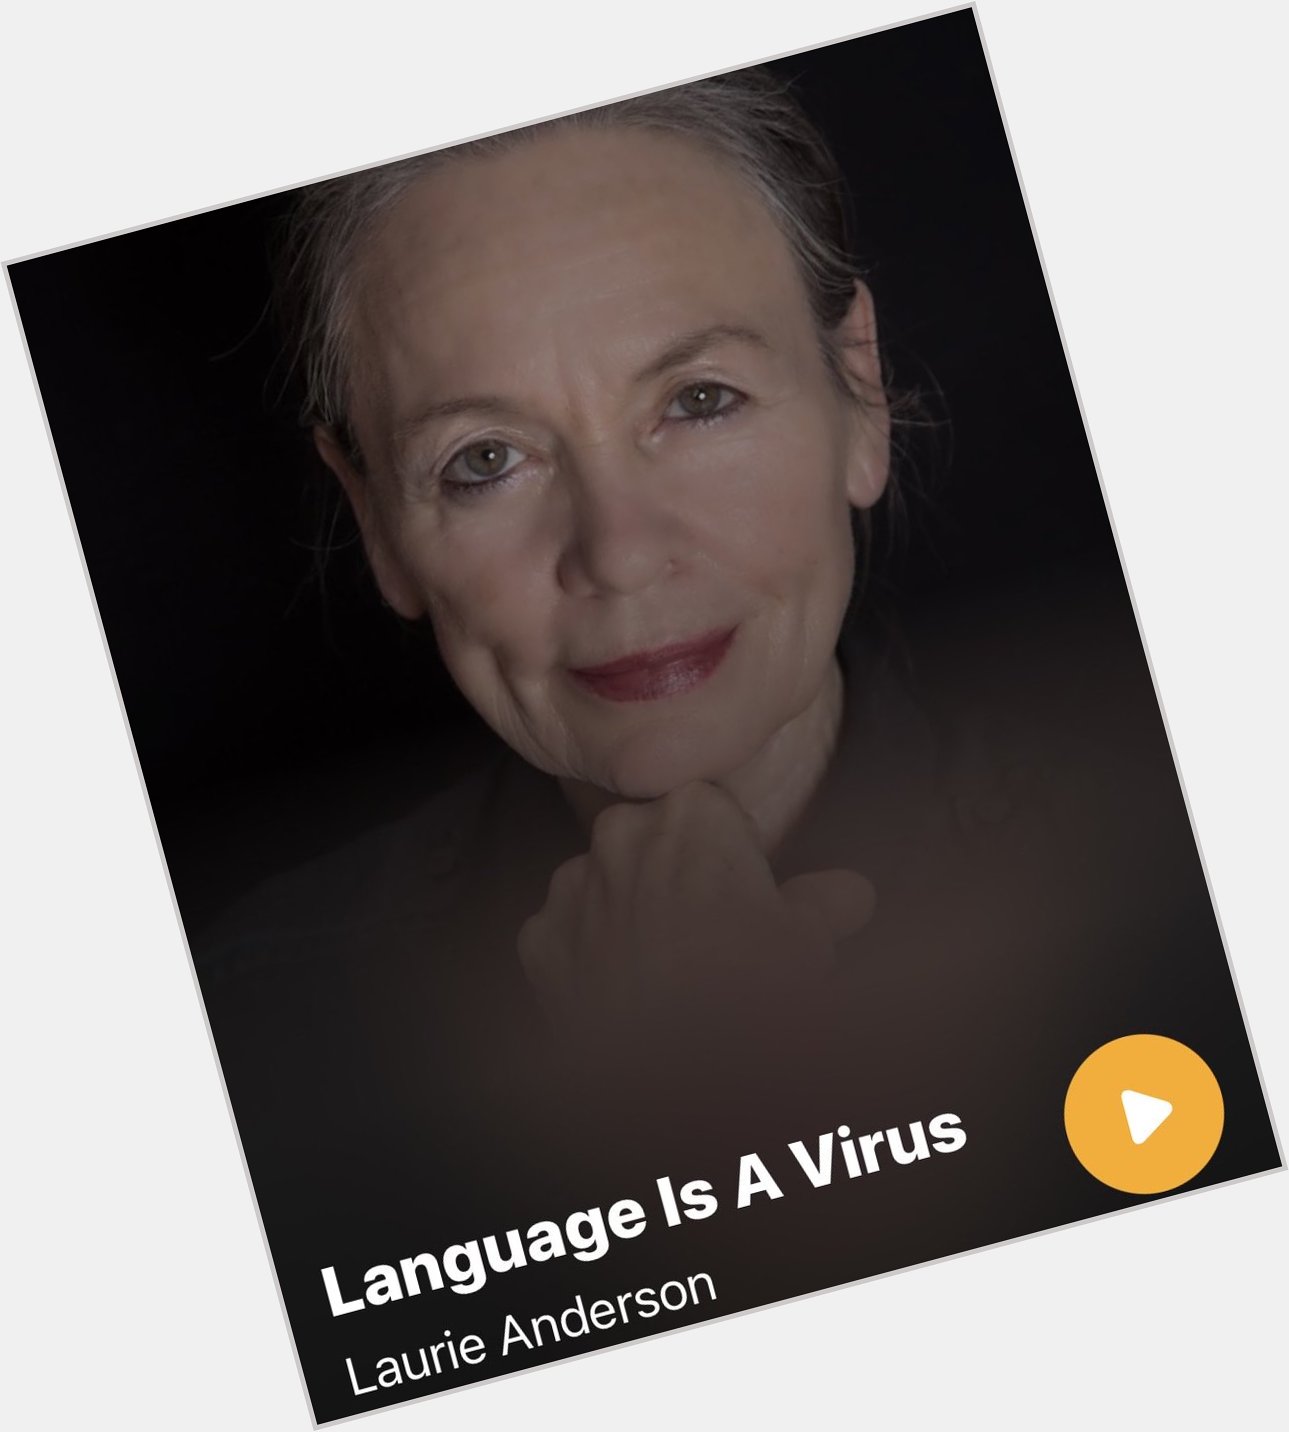            Happy Birthday Laurie Anderson
Language Is A Virus

very interesting title, like her  